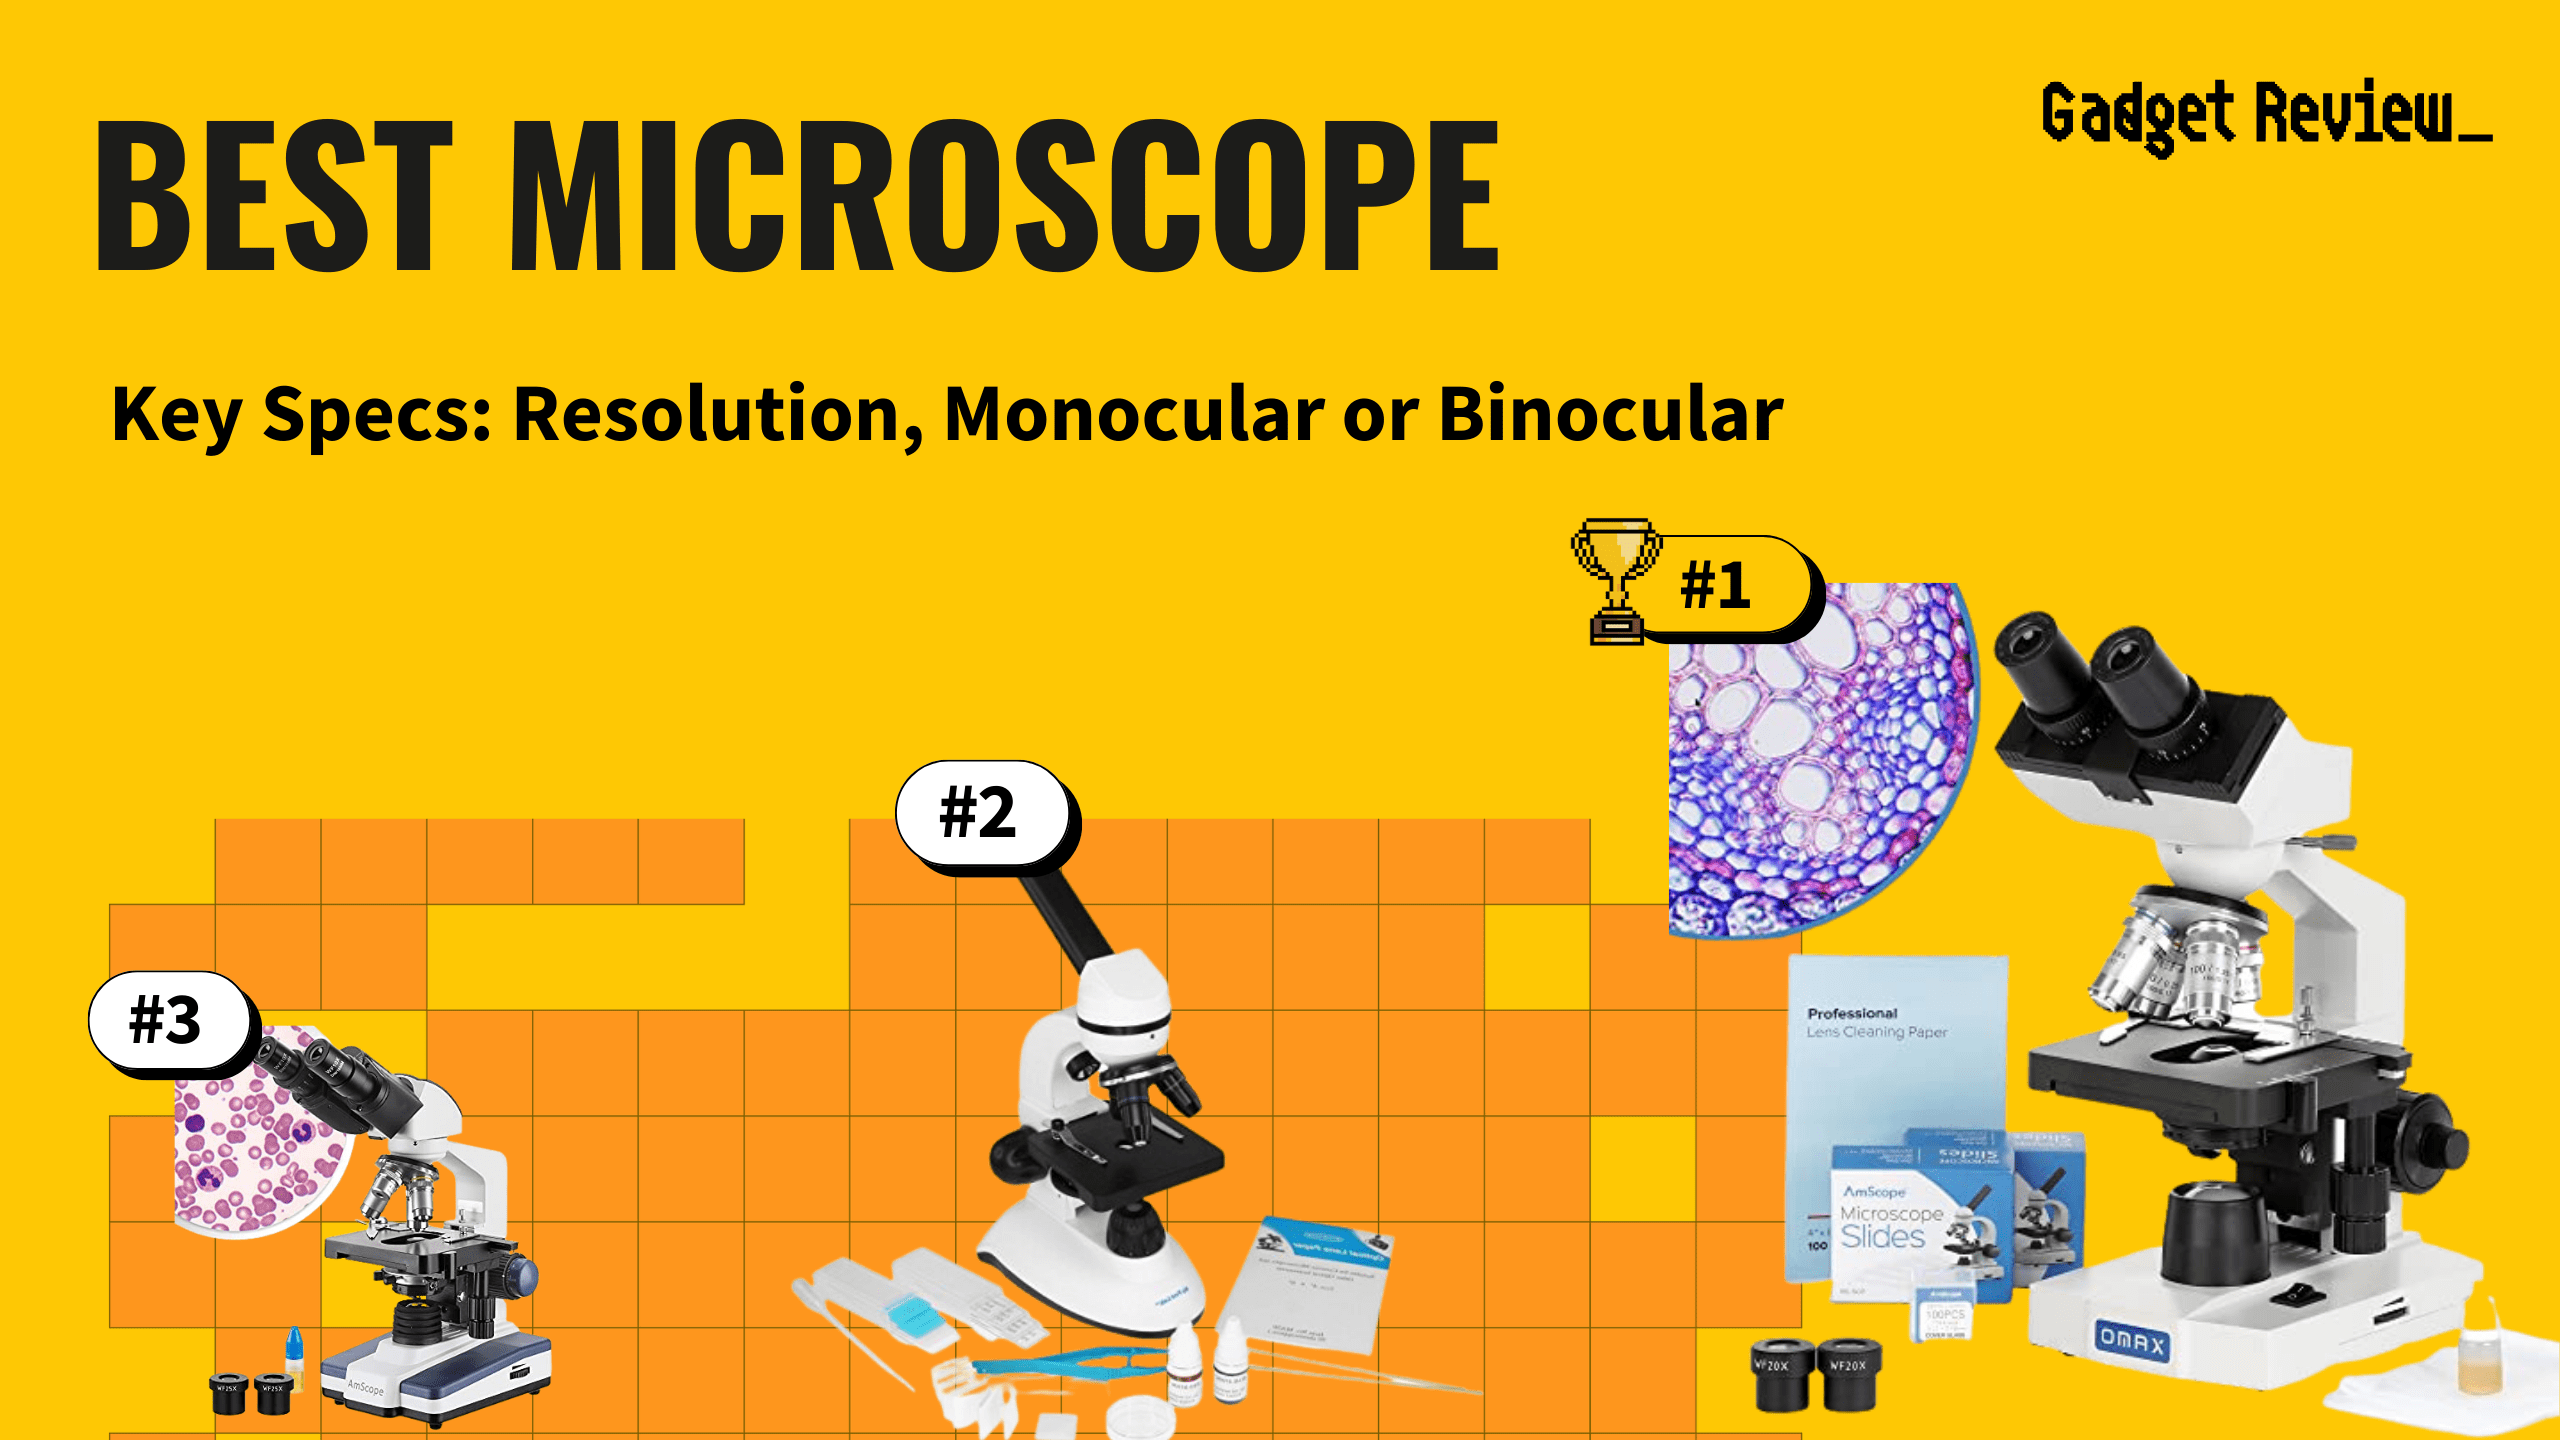 best microscope featured image that shows the top three best toys & game models